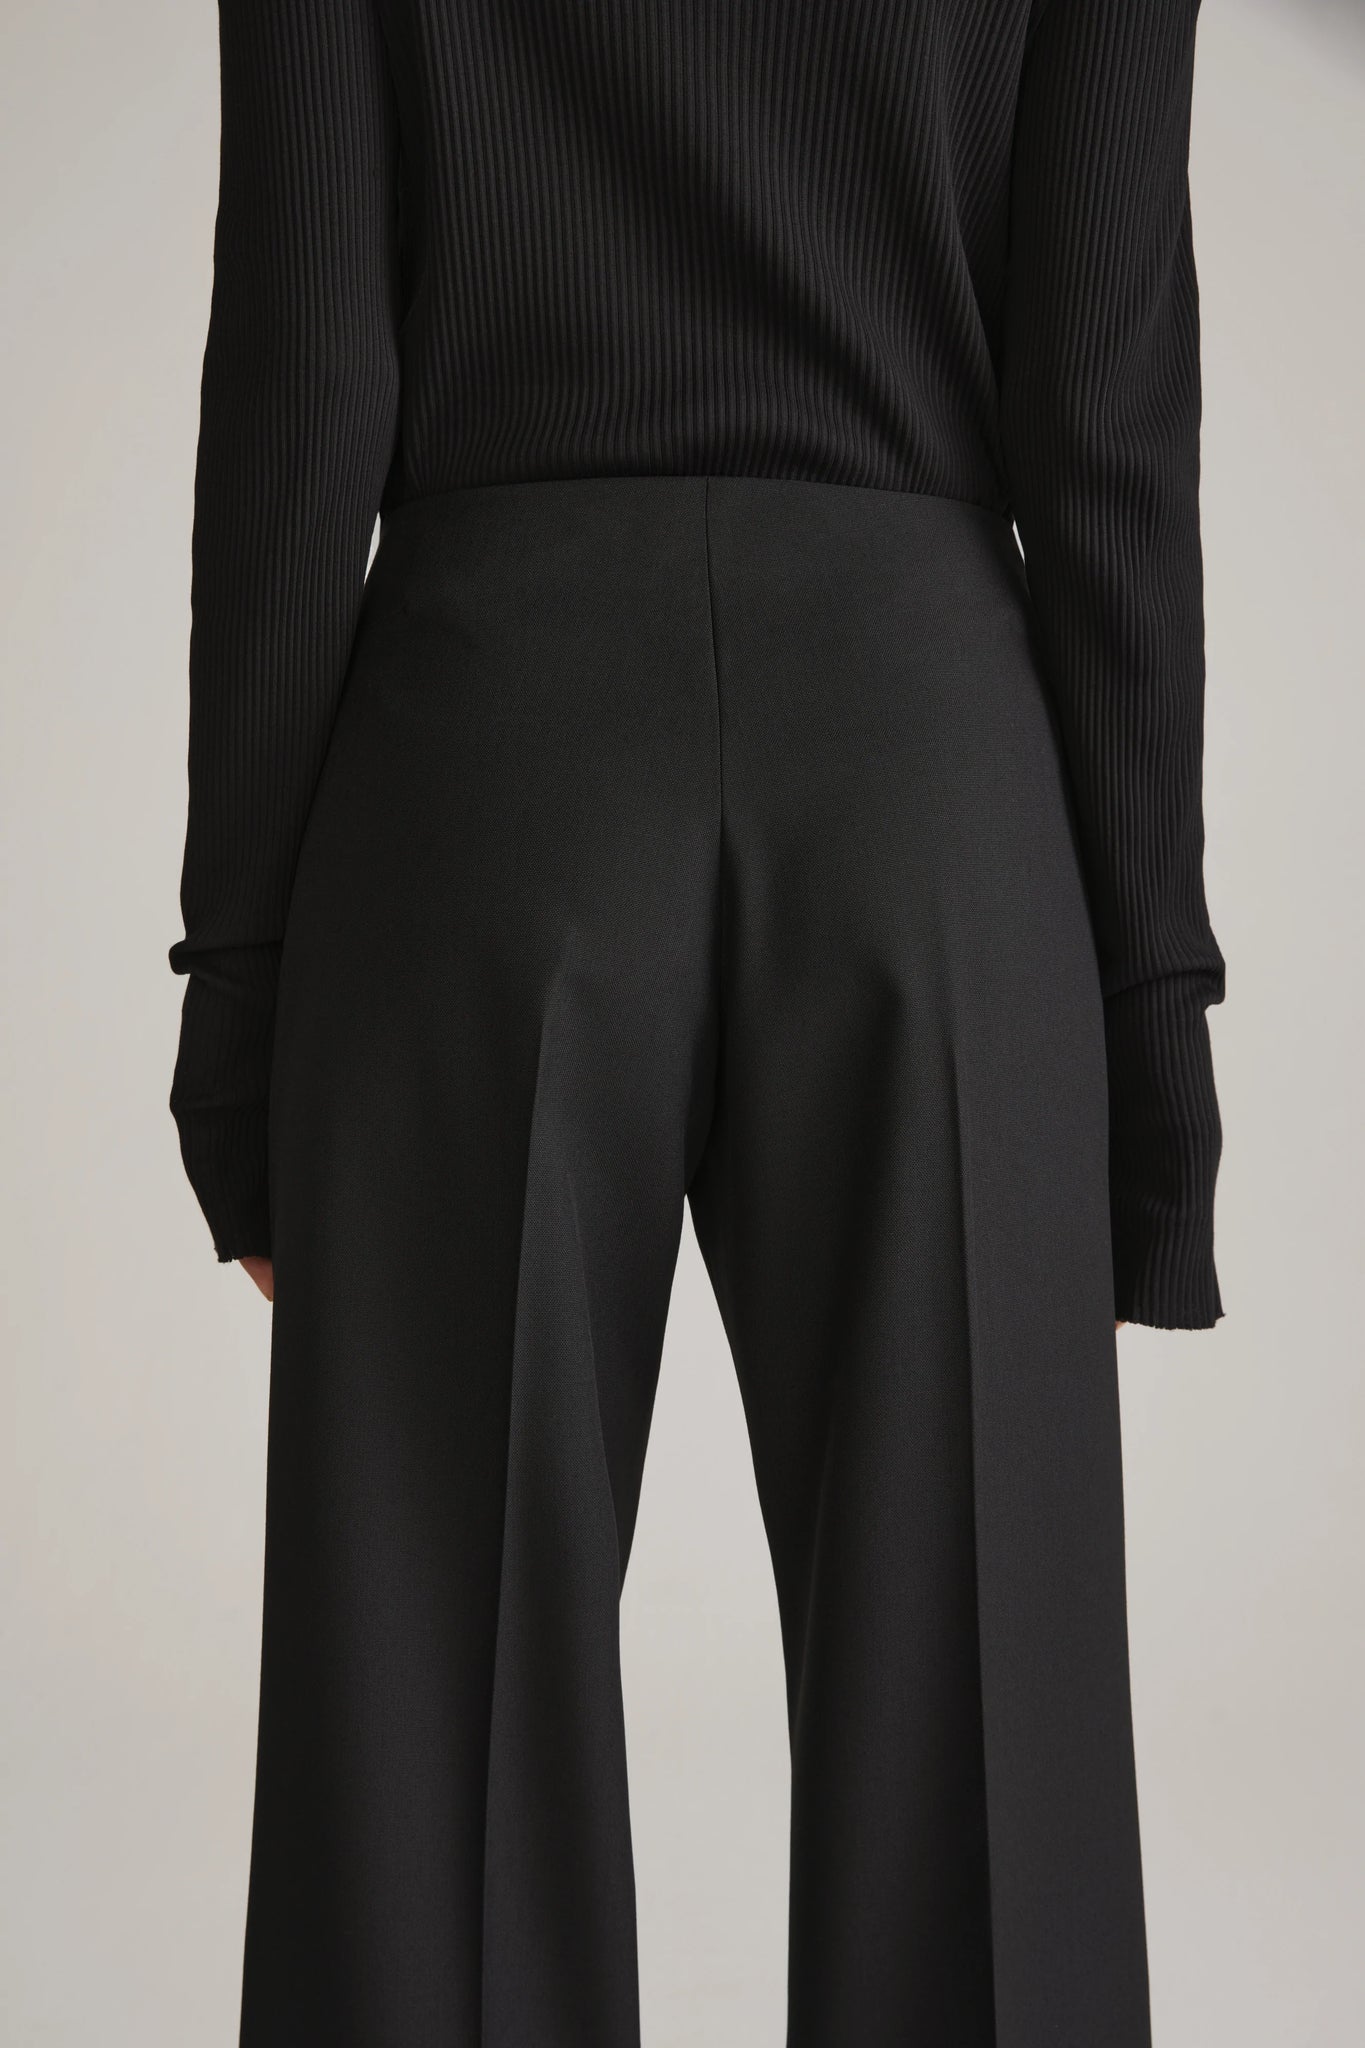 Aspect trousers by Hope - black tailored wool